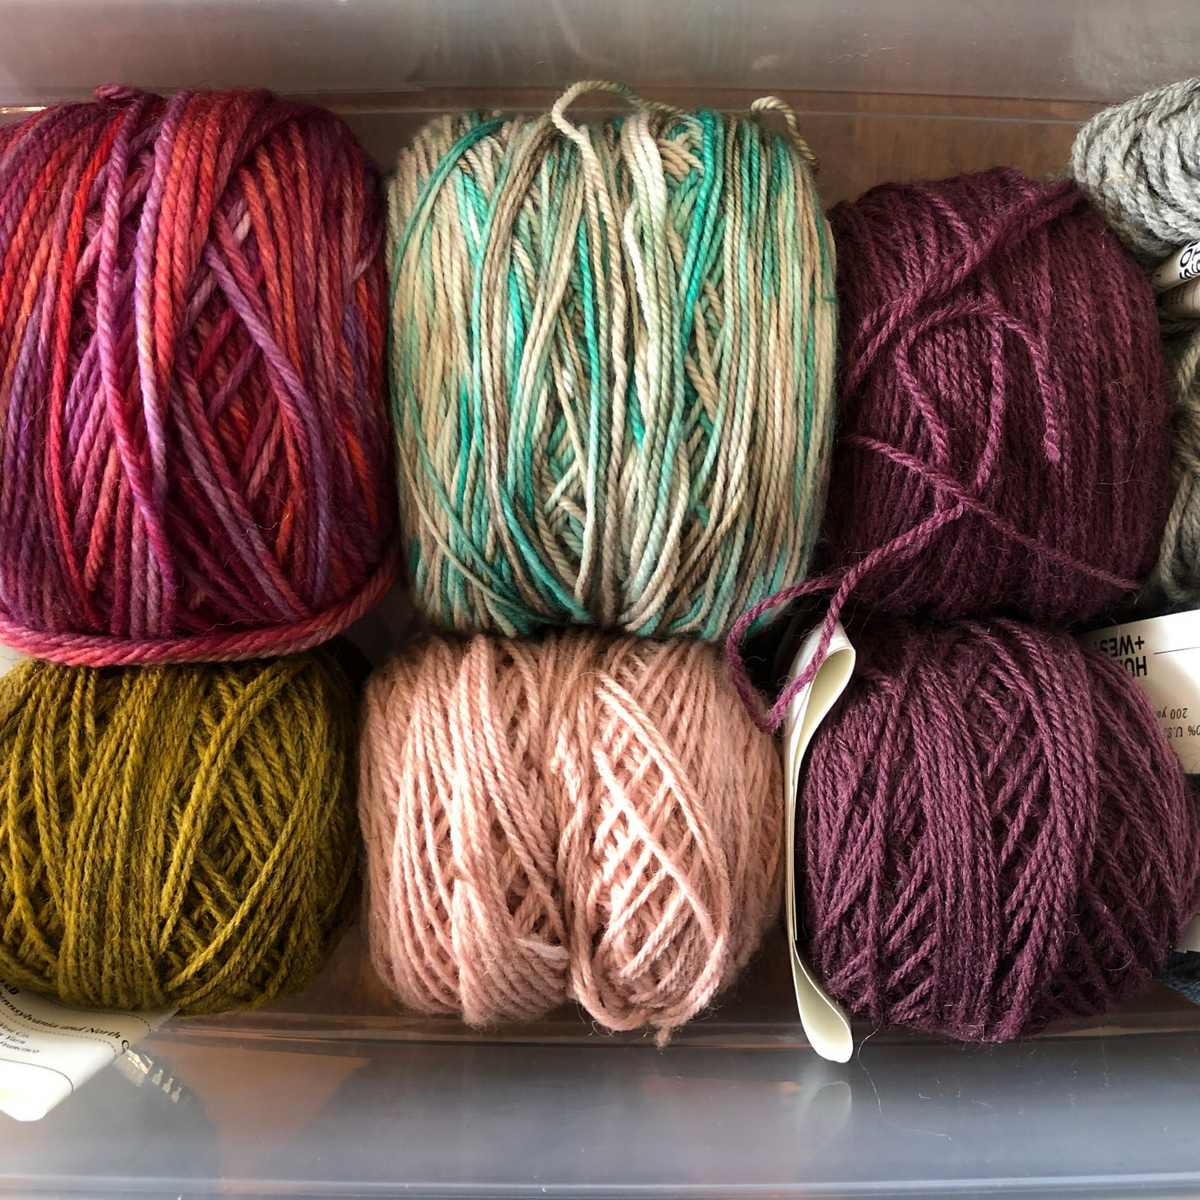 How To Skein (or Reskein) Yarn for Free